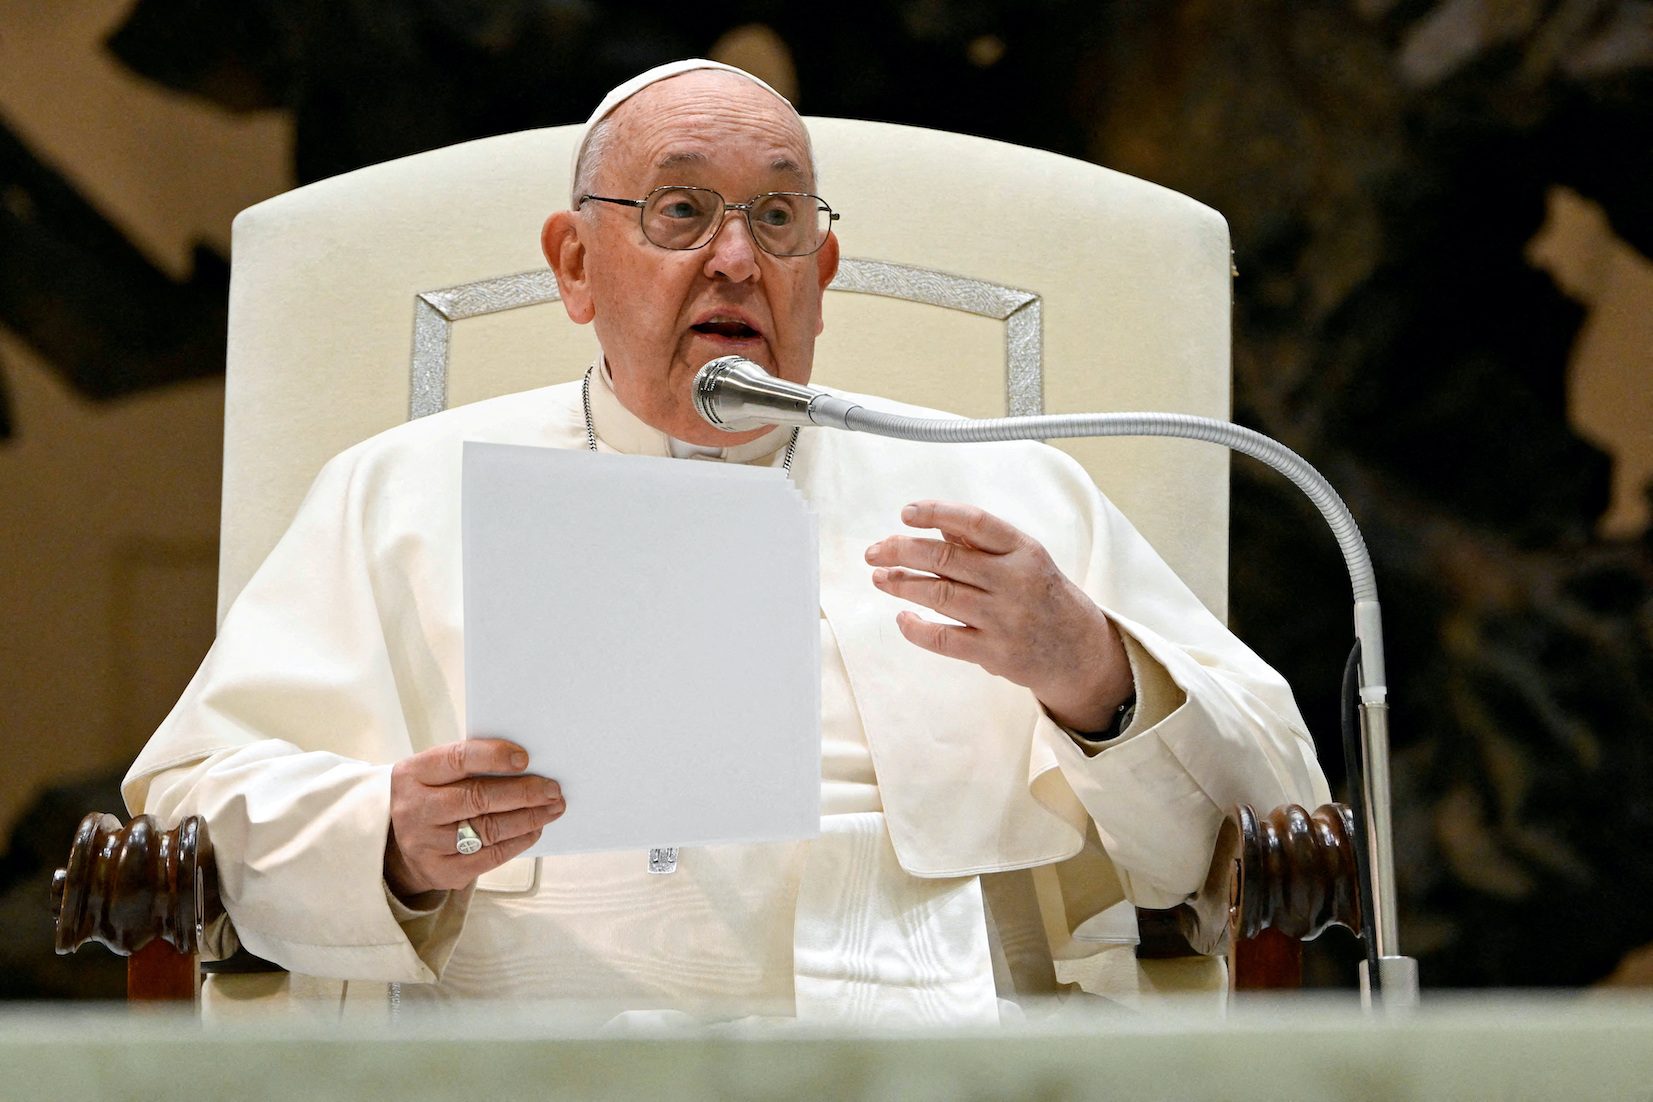 Pope Francis defends same-sex blessings declaration, says it is misunderstood